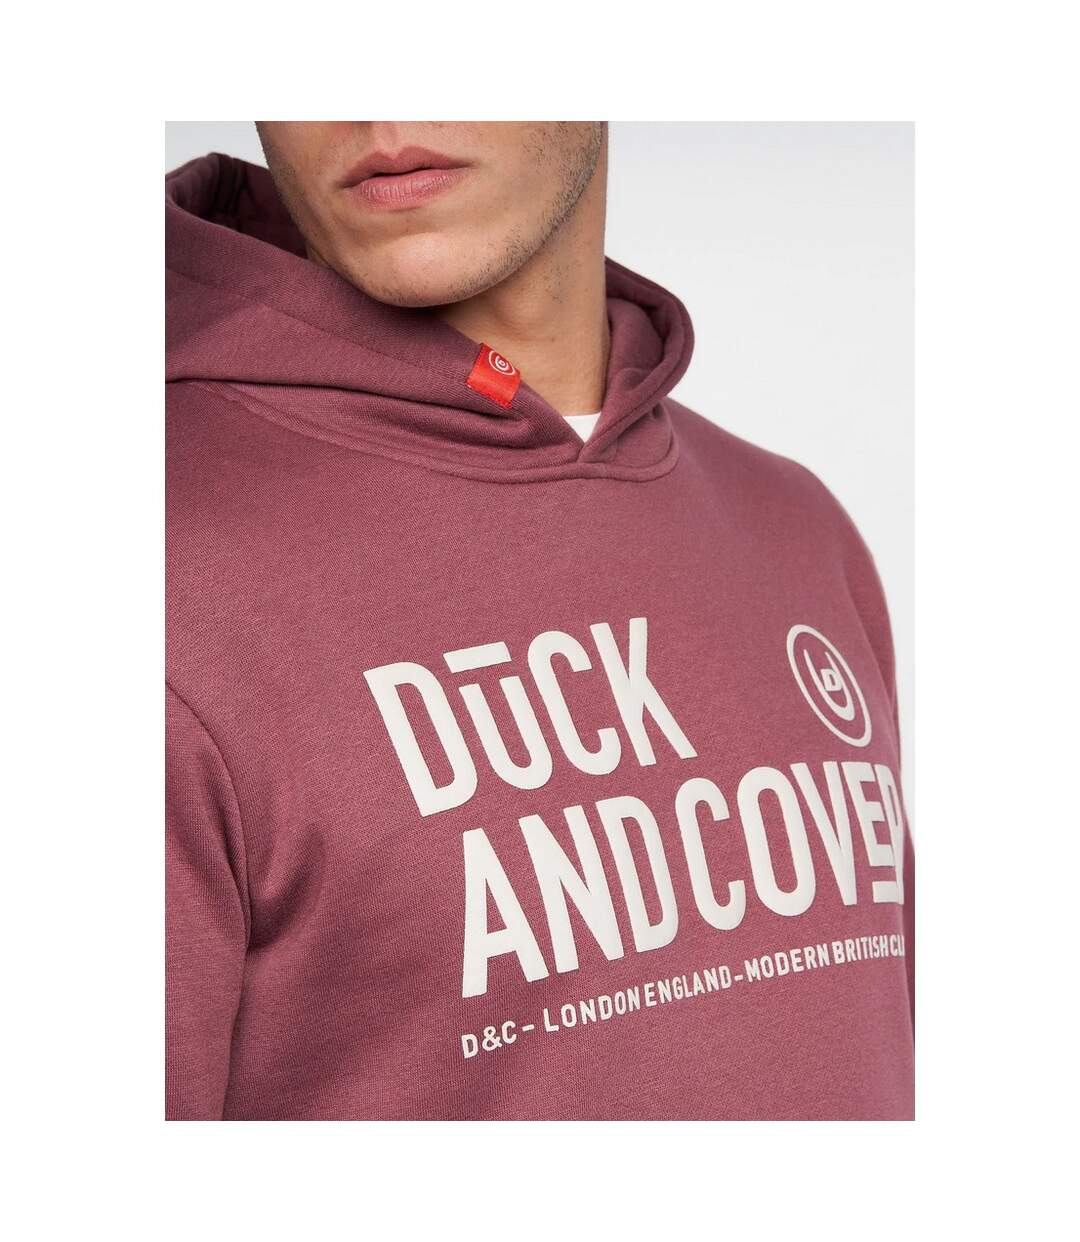 Duck and Cover Mens Hillman Hoodie (Wine)